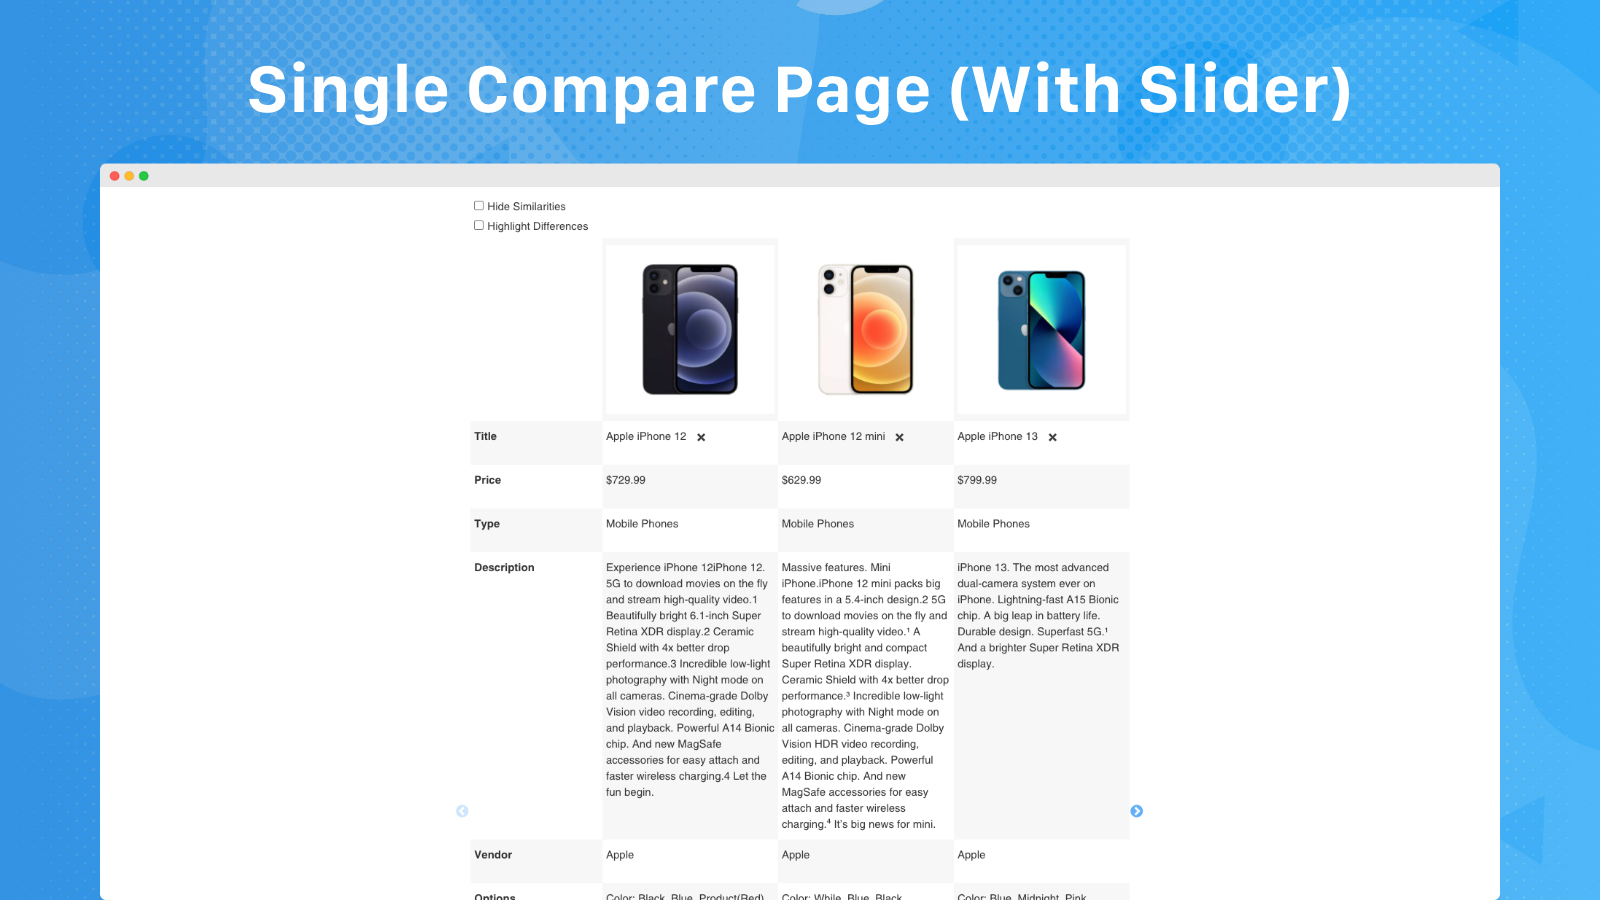 Single Compare Page (With Slider)